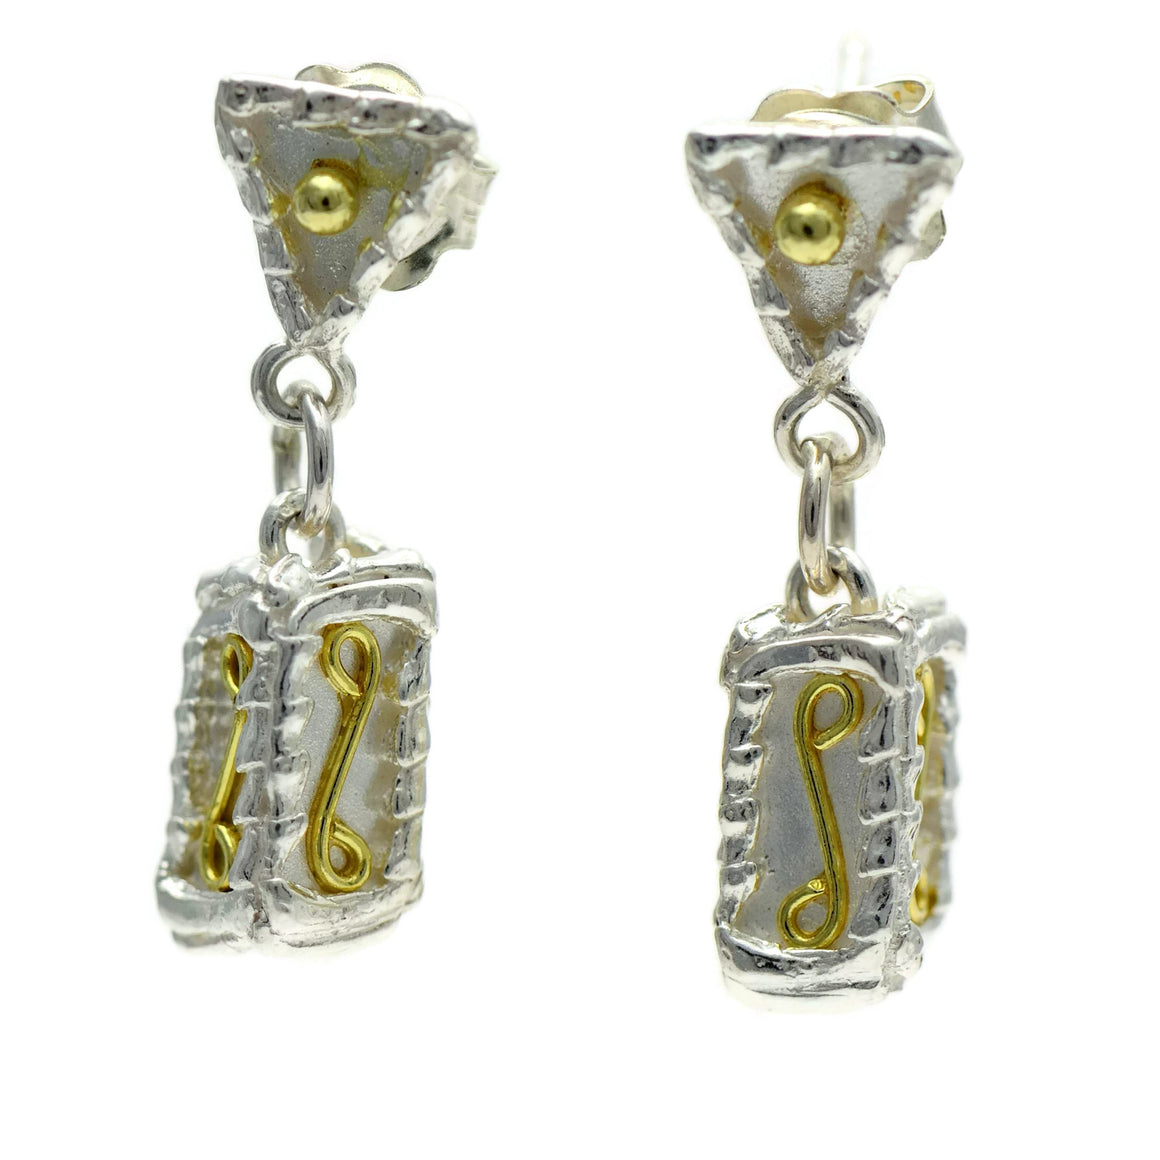 18ct gold and silver petitte patterned 3D rectangle hanging earrings, geometrical designs